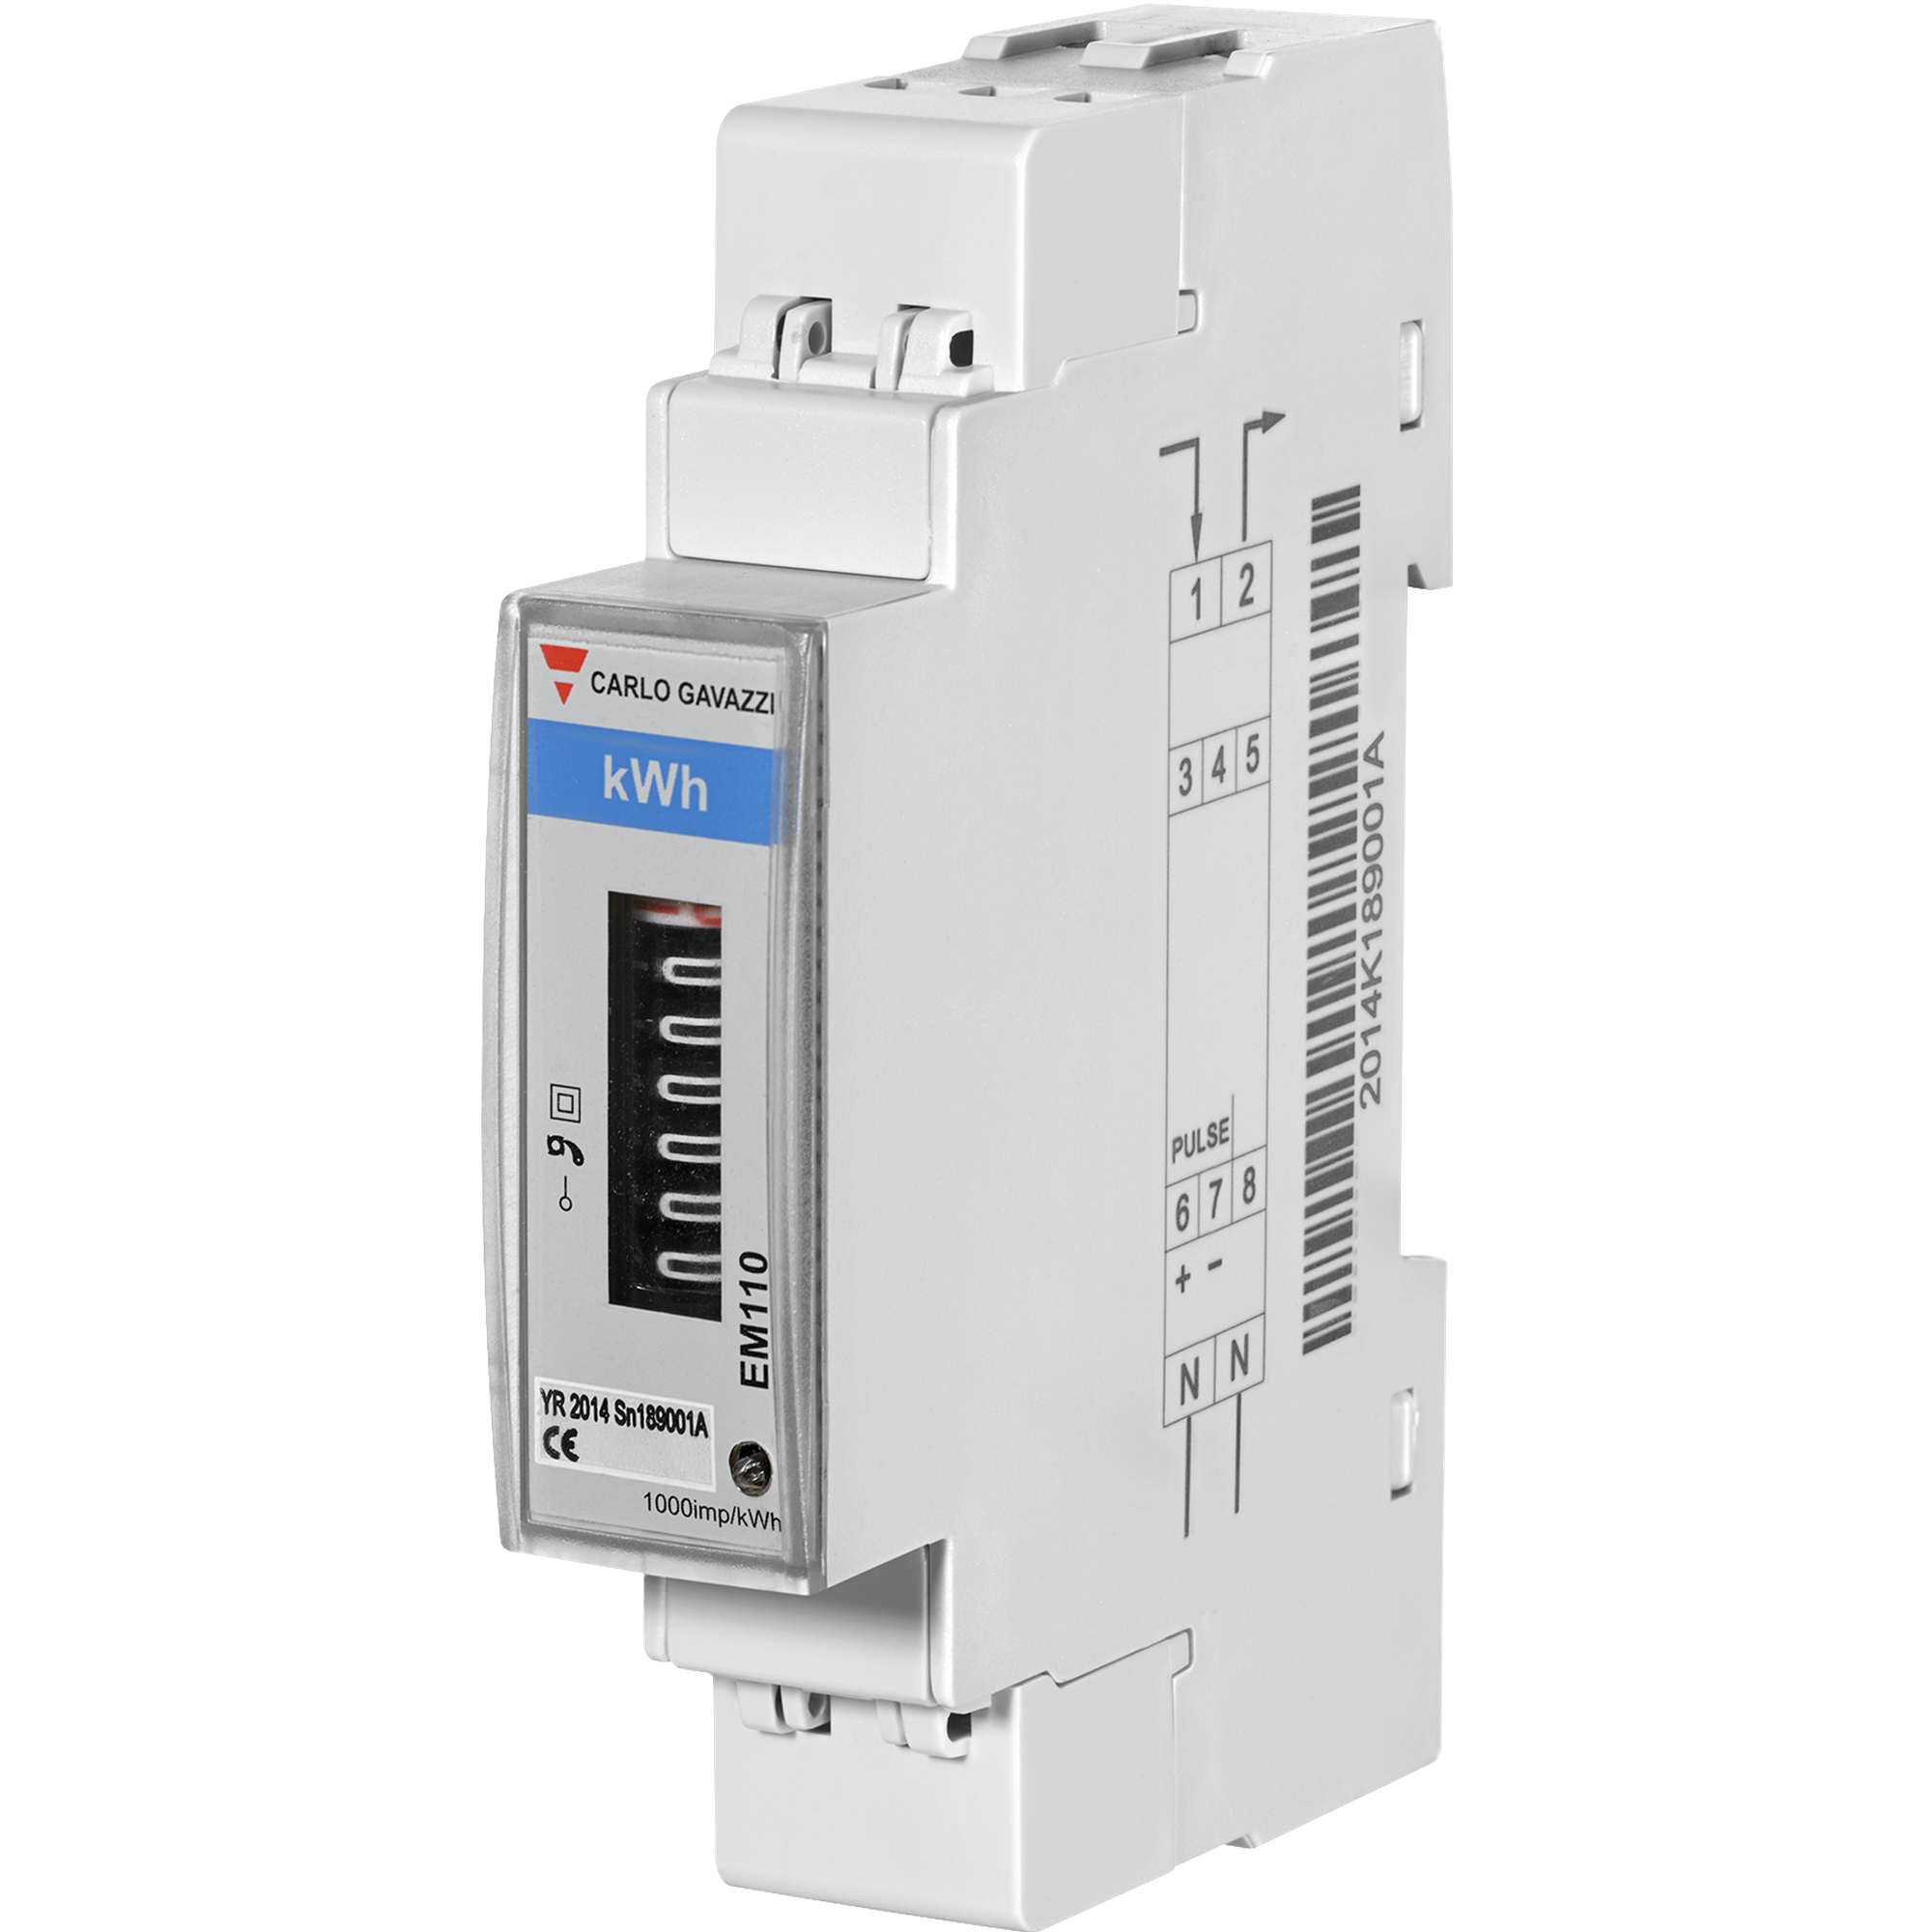 Carlo Gavazzi EM110 Direct connect kWh Counter